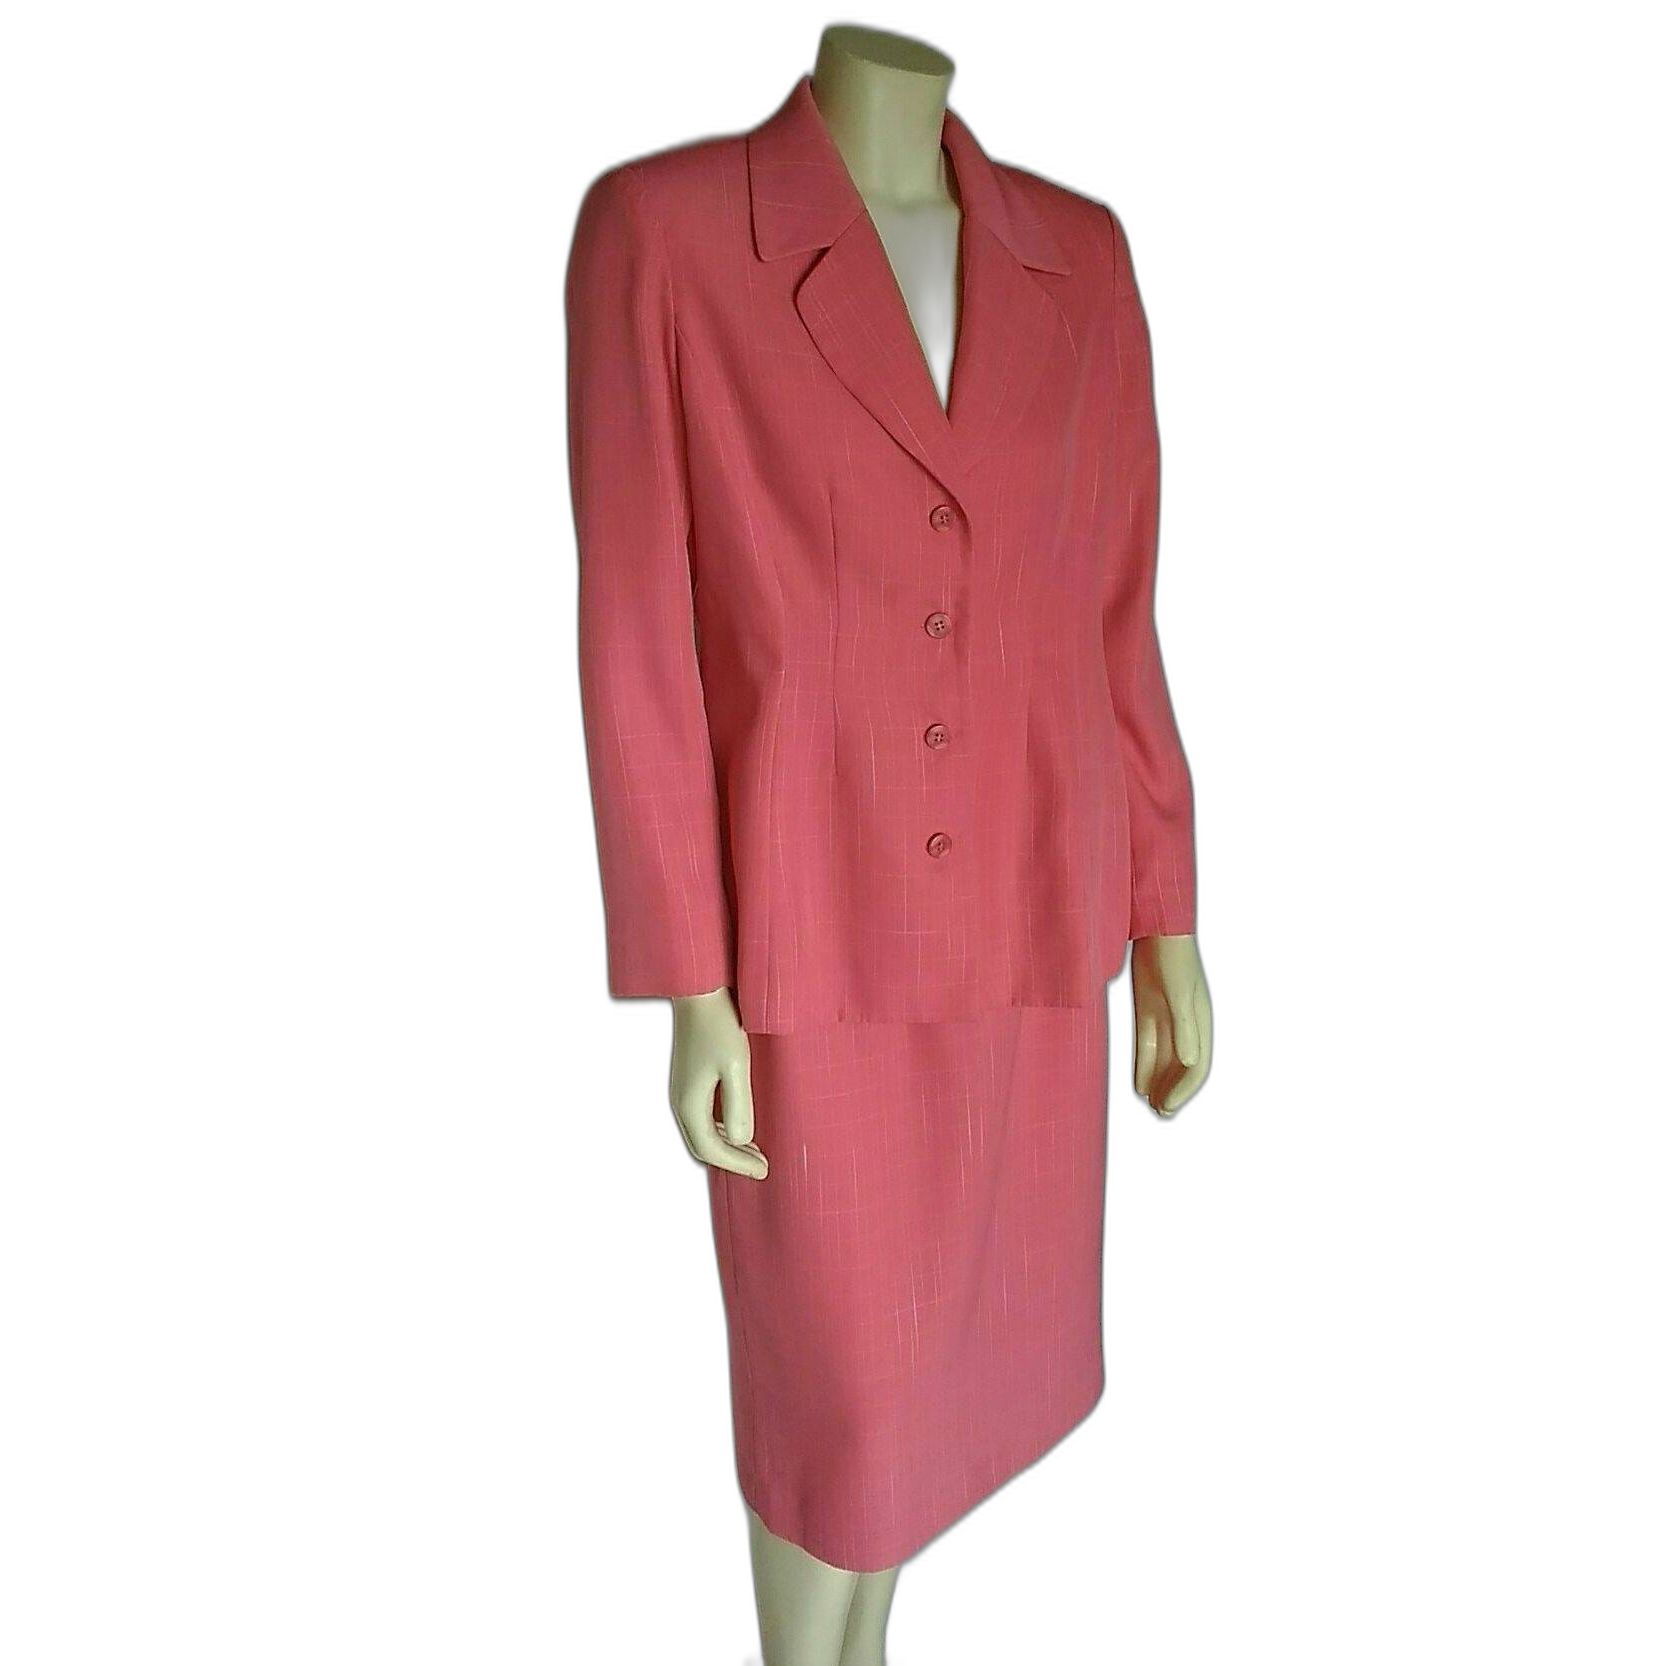 Fabulous Mary McFadden Hot Pink Suit from 2000 Collection